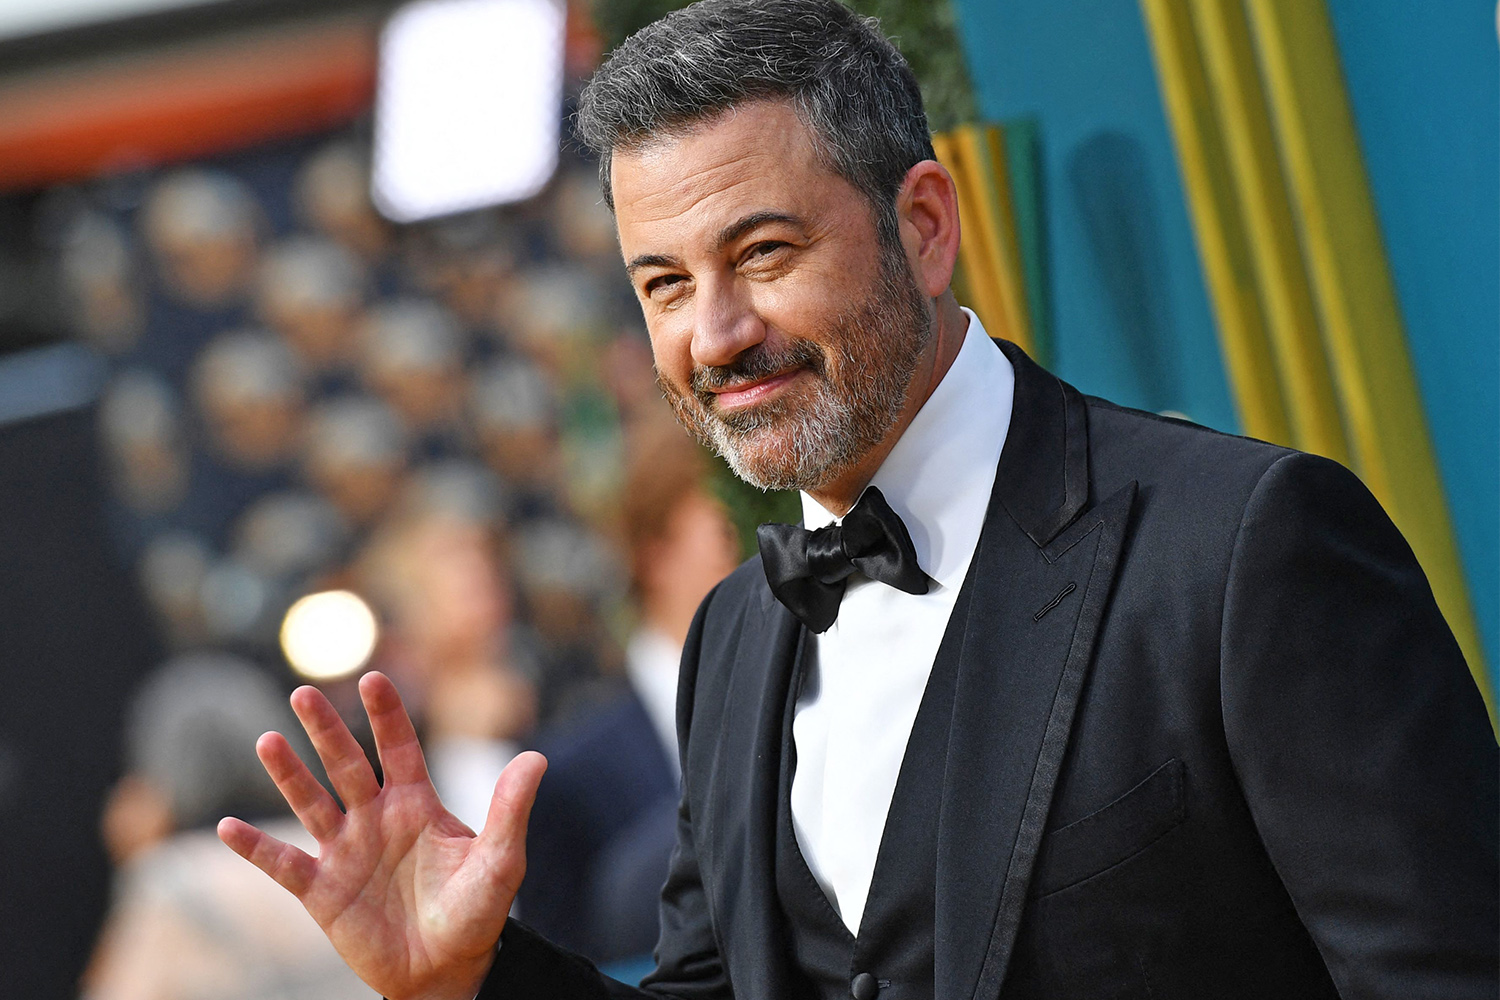 Talk show host Jimmy Kimmel arrives for the 74th Emmy Awards at the Microsoft Theater in Los Angeles, California, on September 12, 2022. (Photo by Chris Delmas / AFP) (Photo by CHRIS DELMAS/AFP via Getty Images)